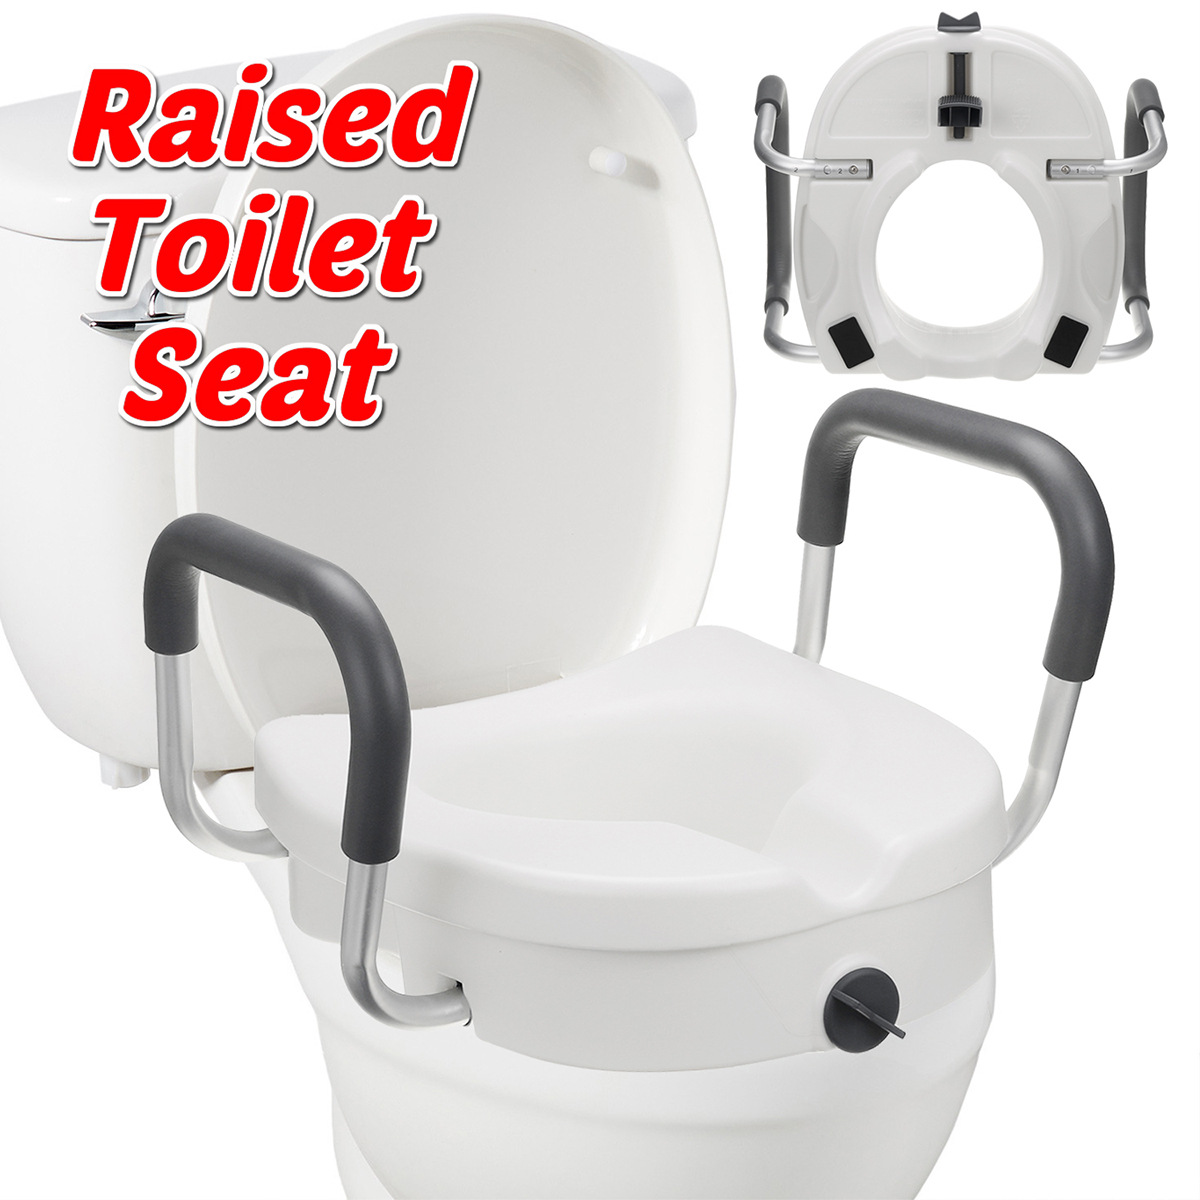 Removable Raised Toilet Seat With Arms Handles Padded Disability Aid Elderly Supports 3